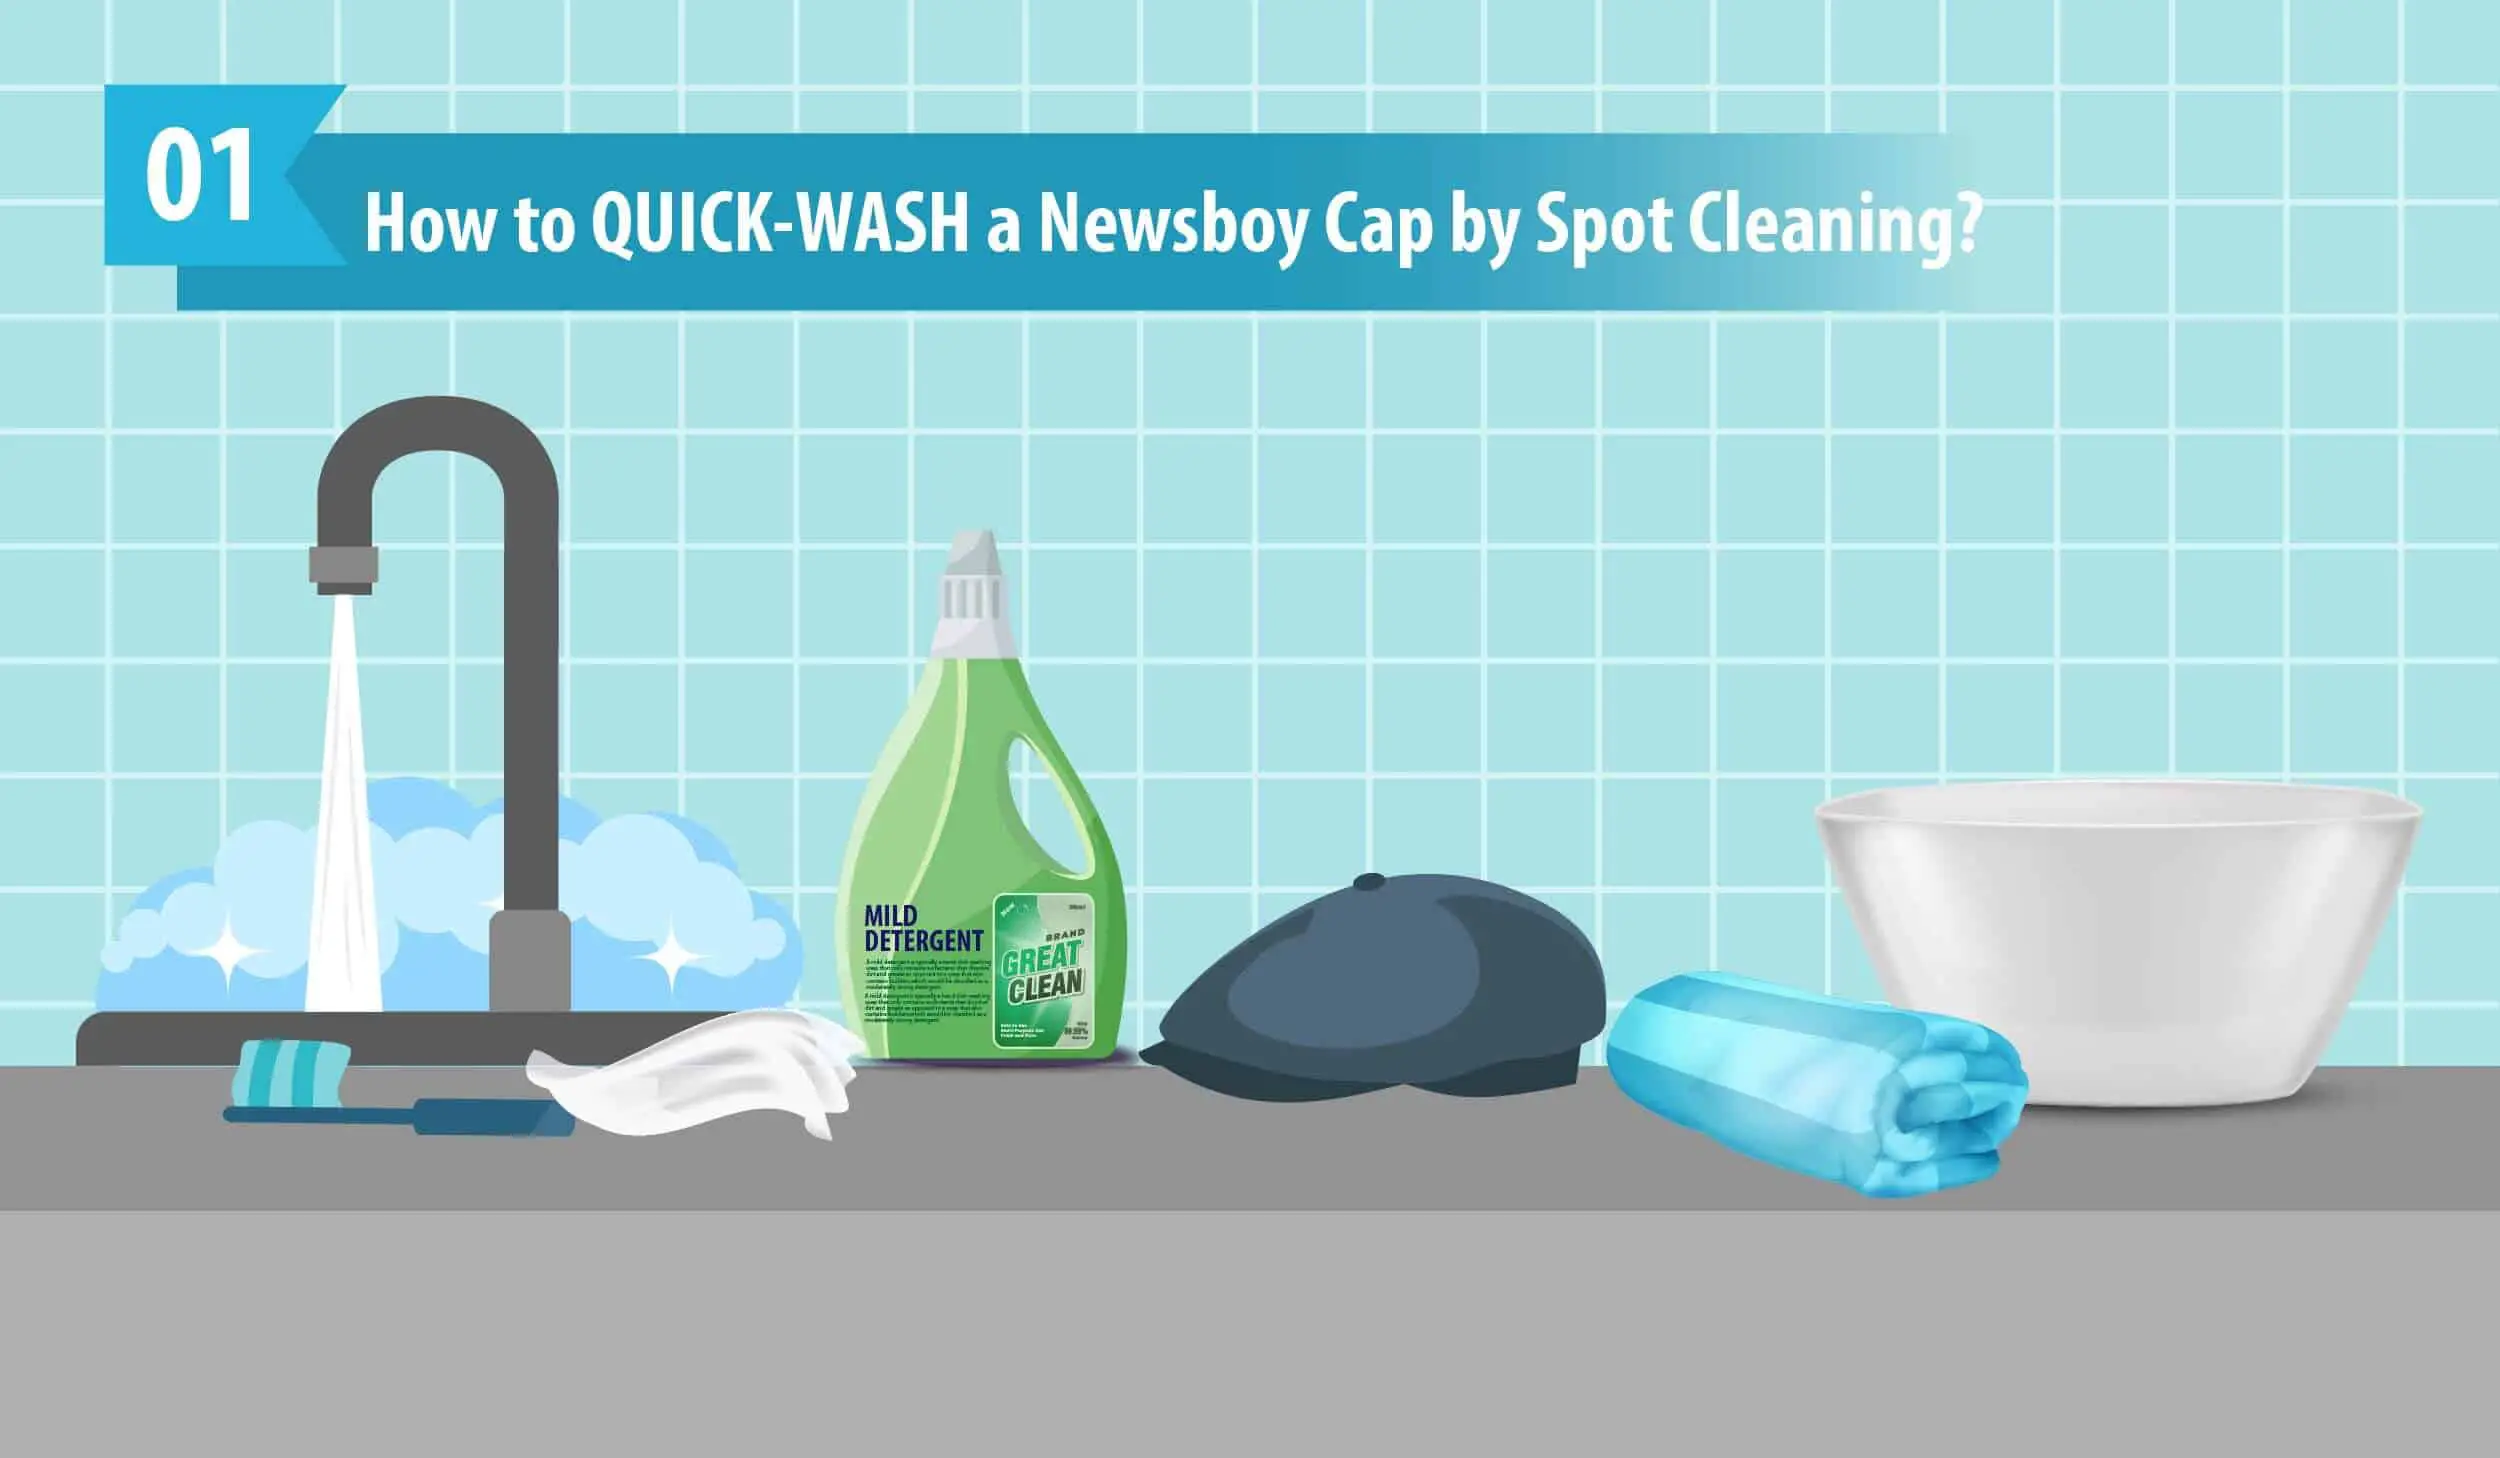 How to QUICK-WASH a Newsboy Cap by Spot Cleaning